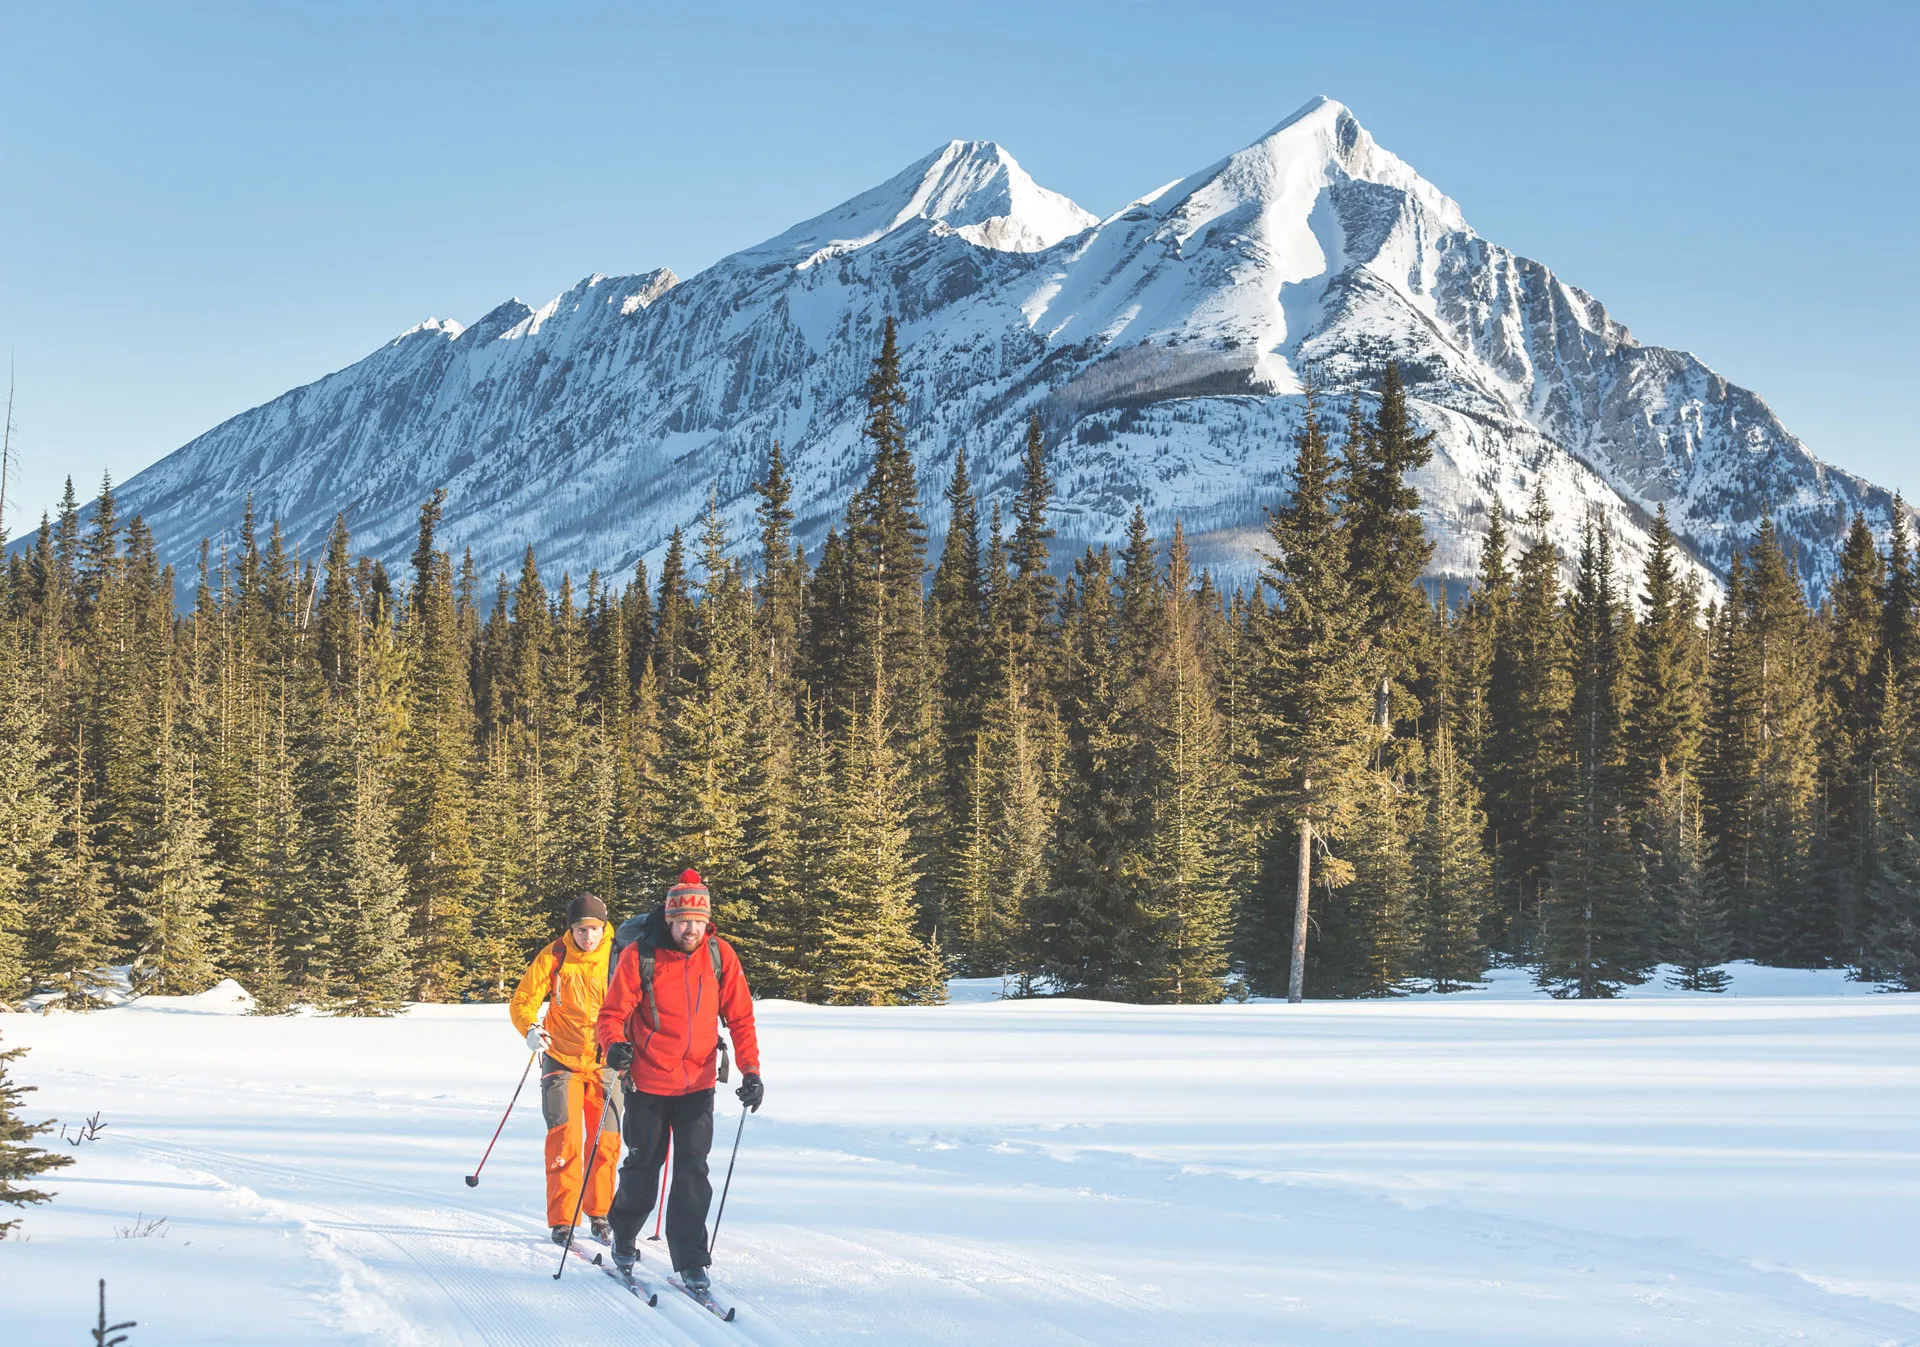 Groomed trails at the Canmore Nordic Centre (Photo credit: Matthew Clark).